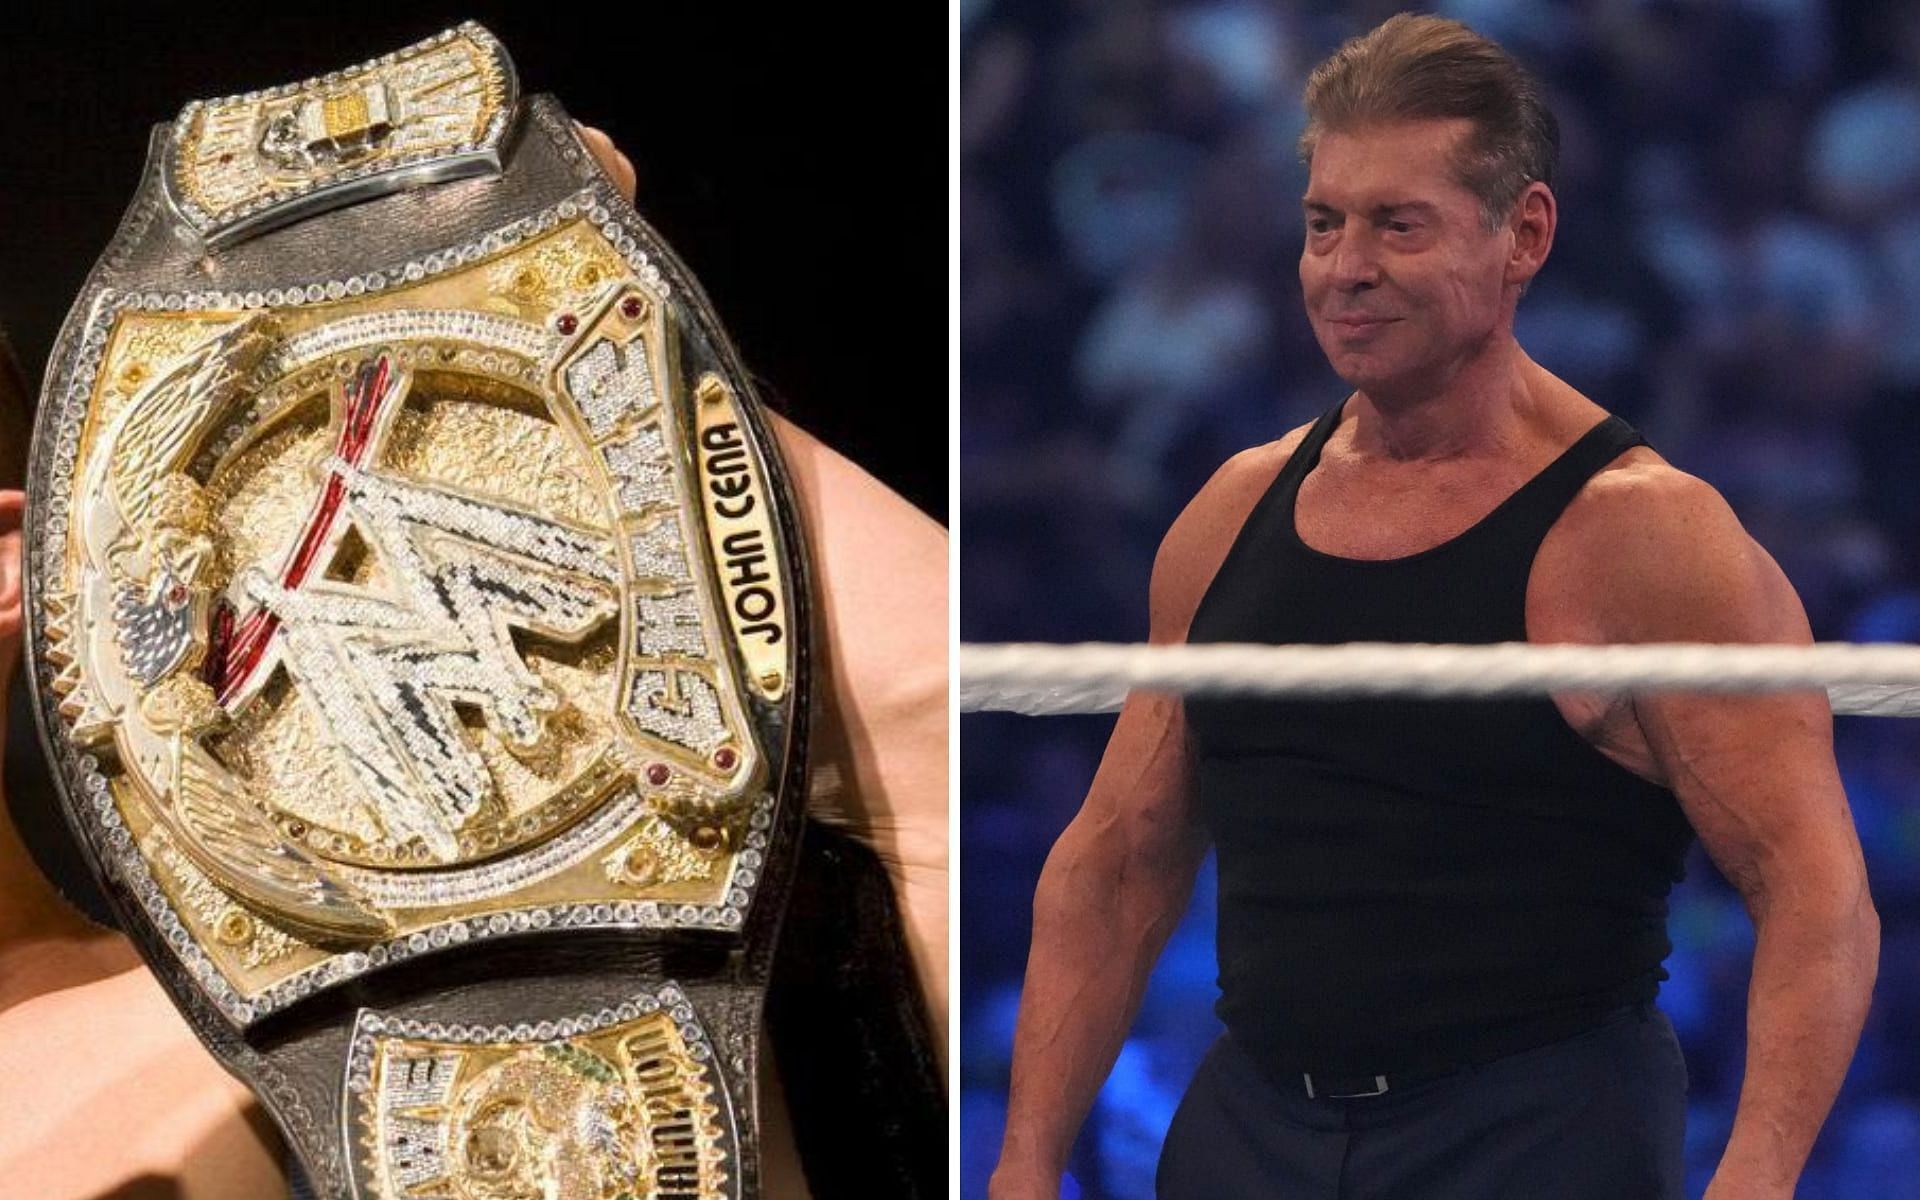 Vince McMahon competed at WrestleMania 38 and won!